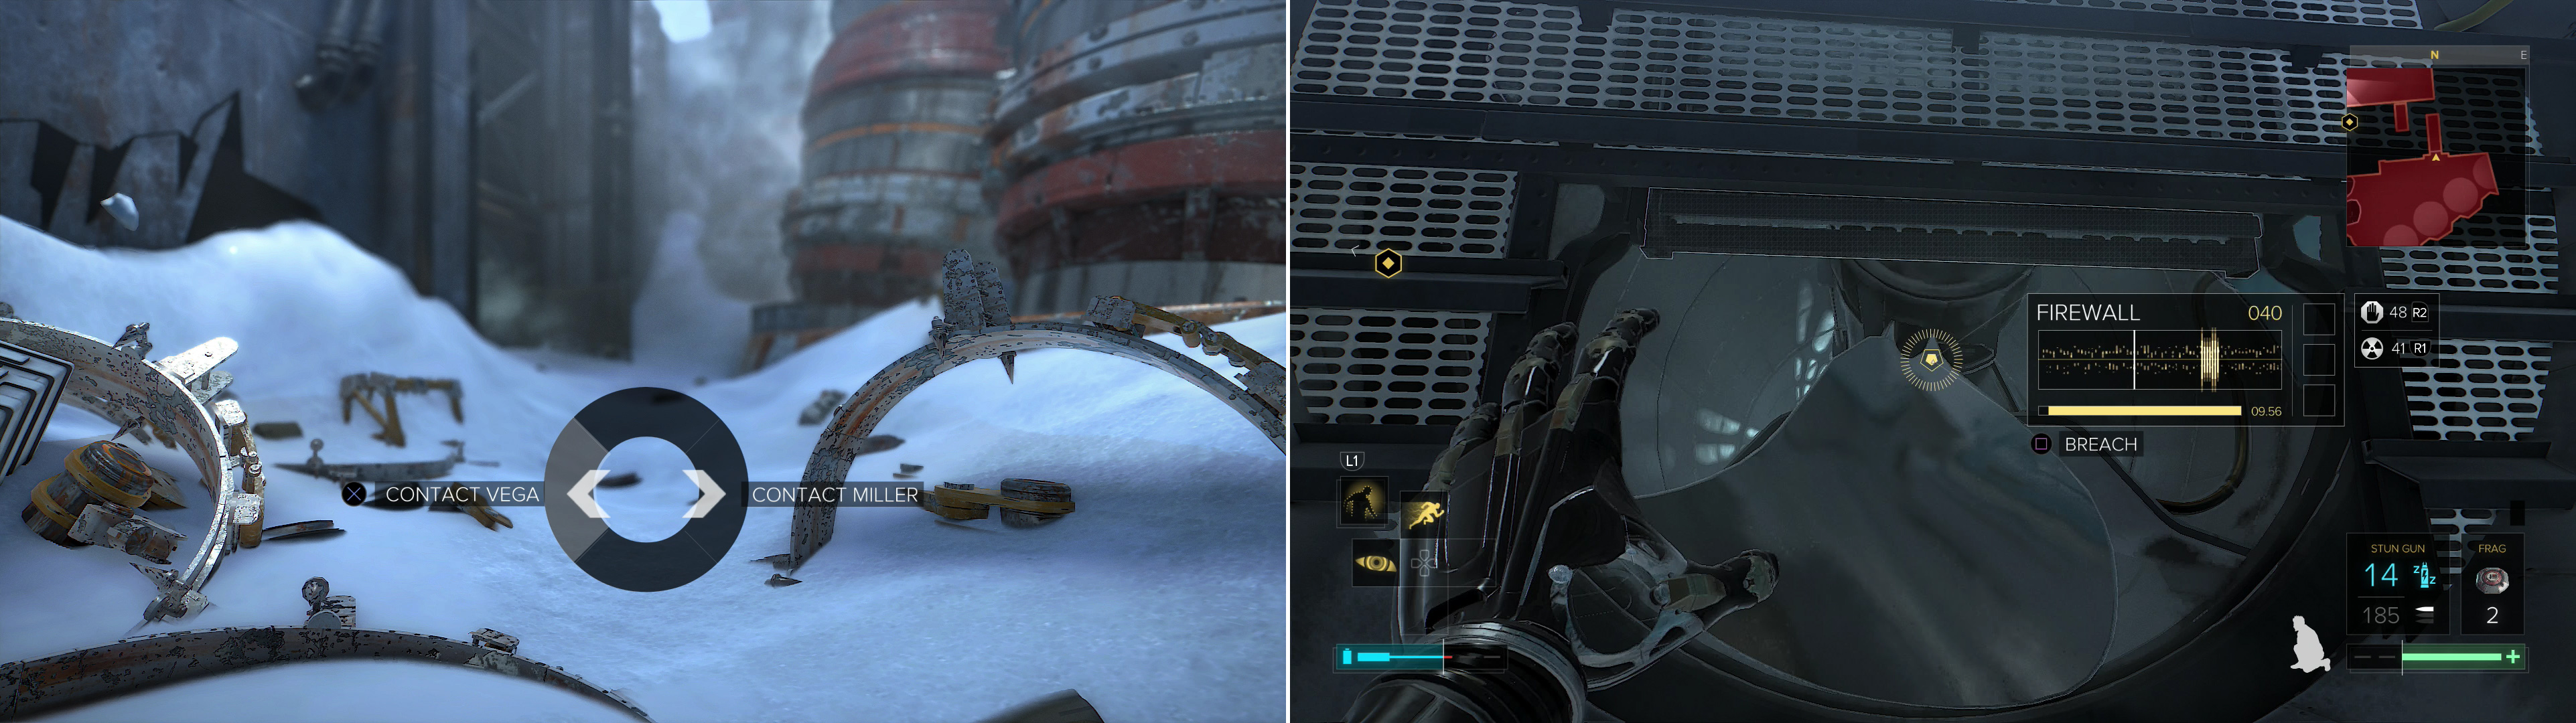 When you’re back in control of your faculties, call Vega to avoid problems later (left). Remote Hack a airshaft to sneak into Hangar 1 (right).